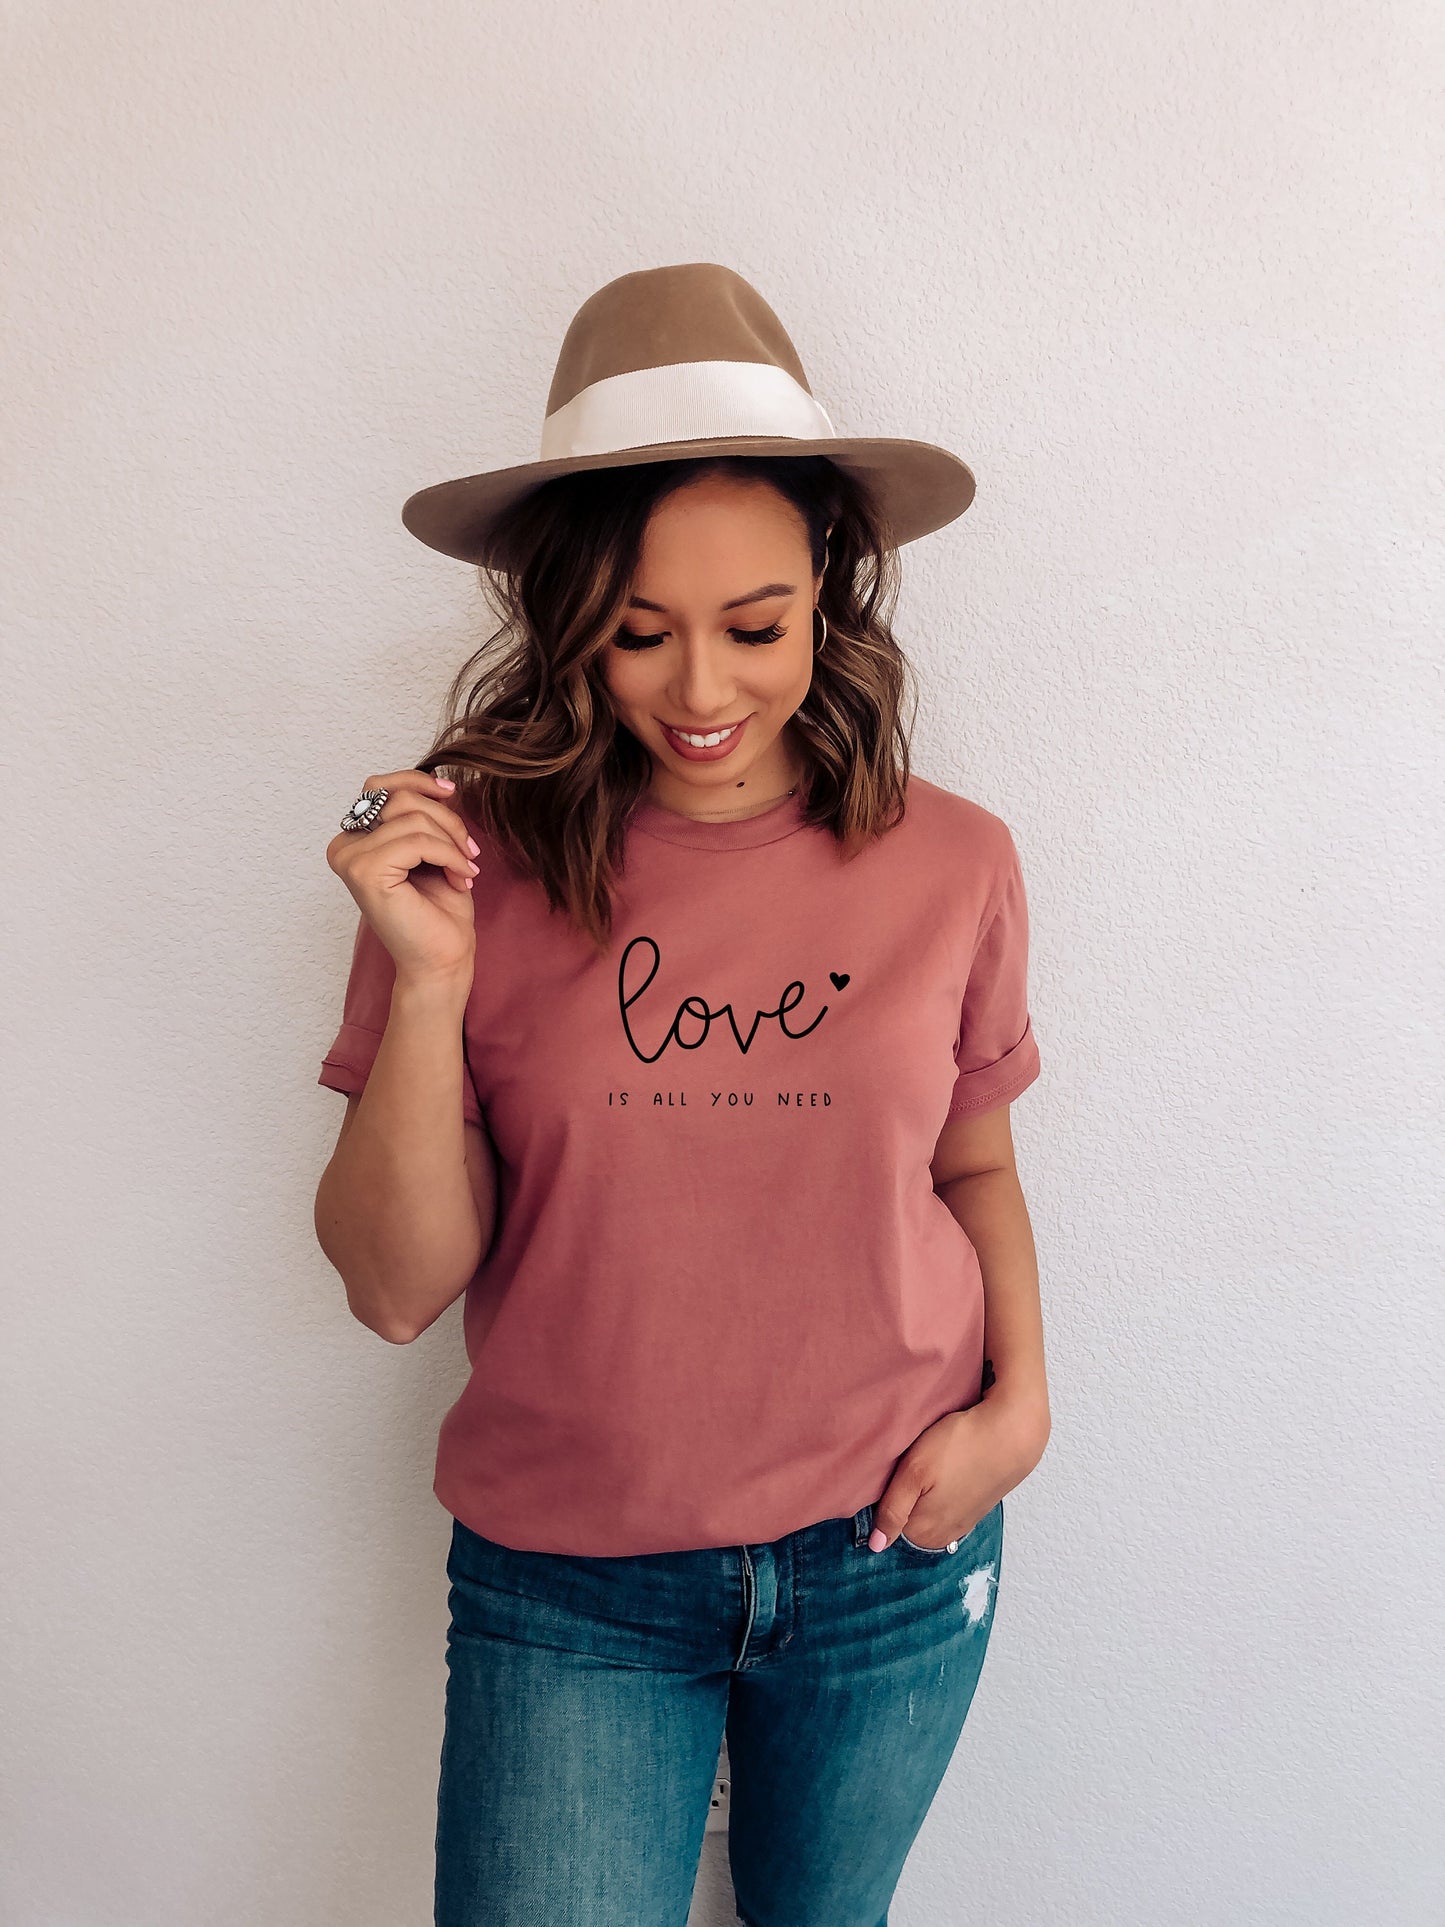 Love Is all You Need - Women's Valentine's Day Shirt